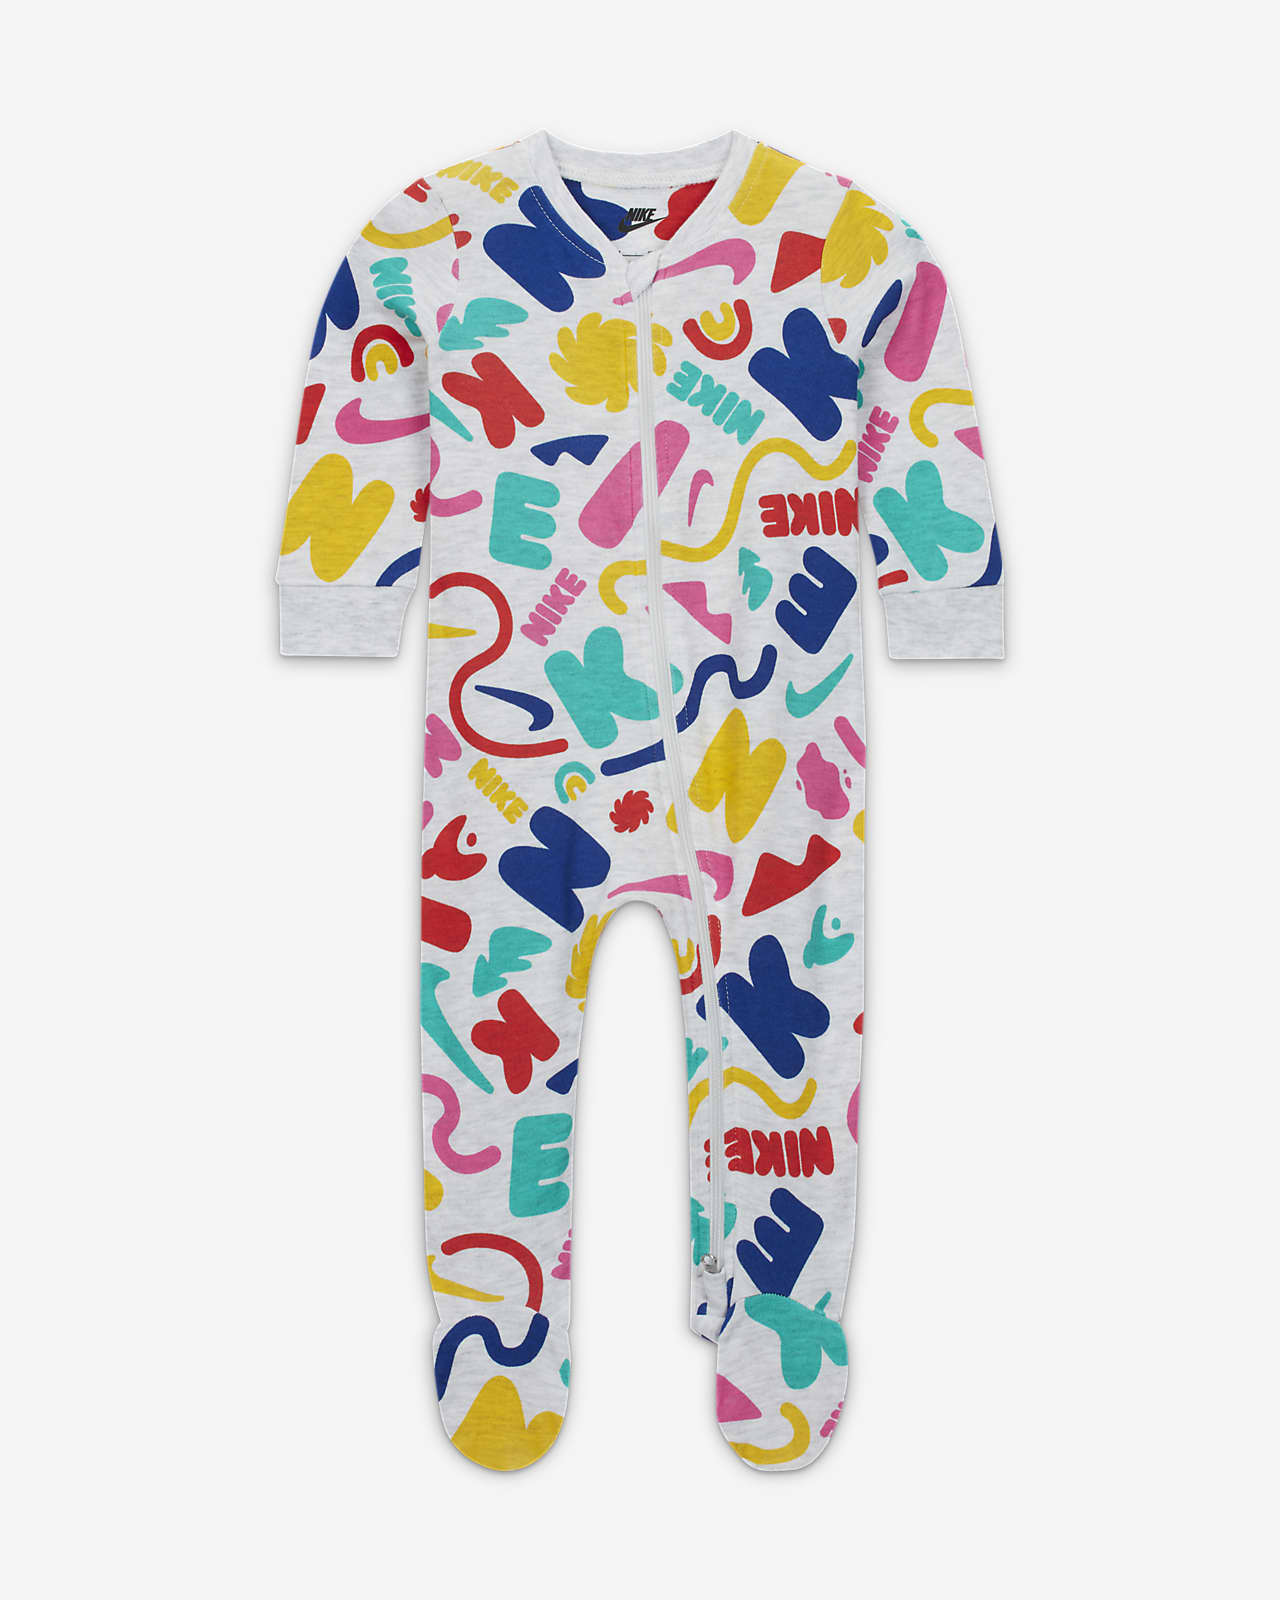 Nike Sportswear Primary Play Footed Coverall Granota - Nadó